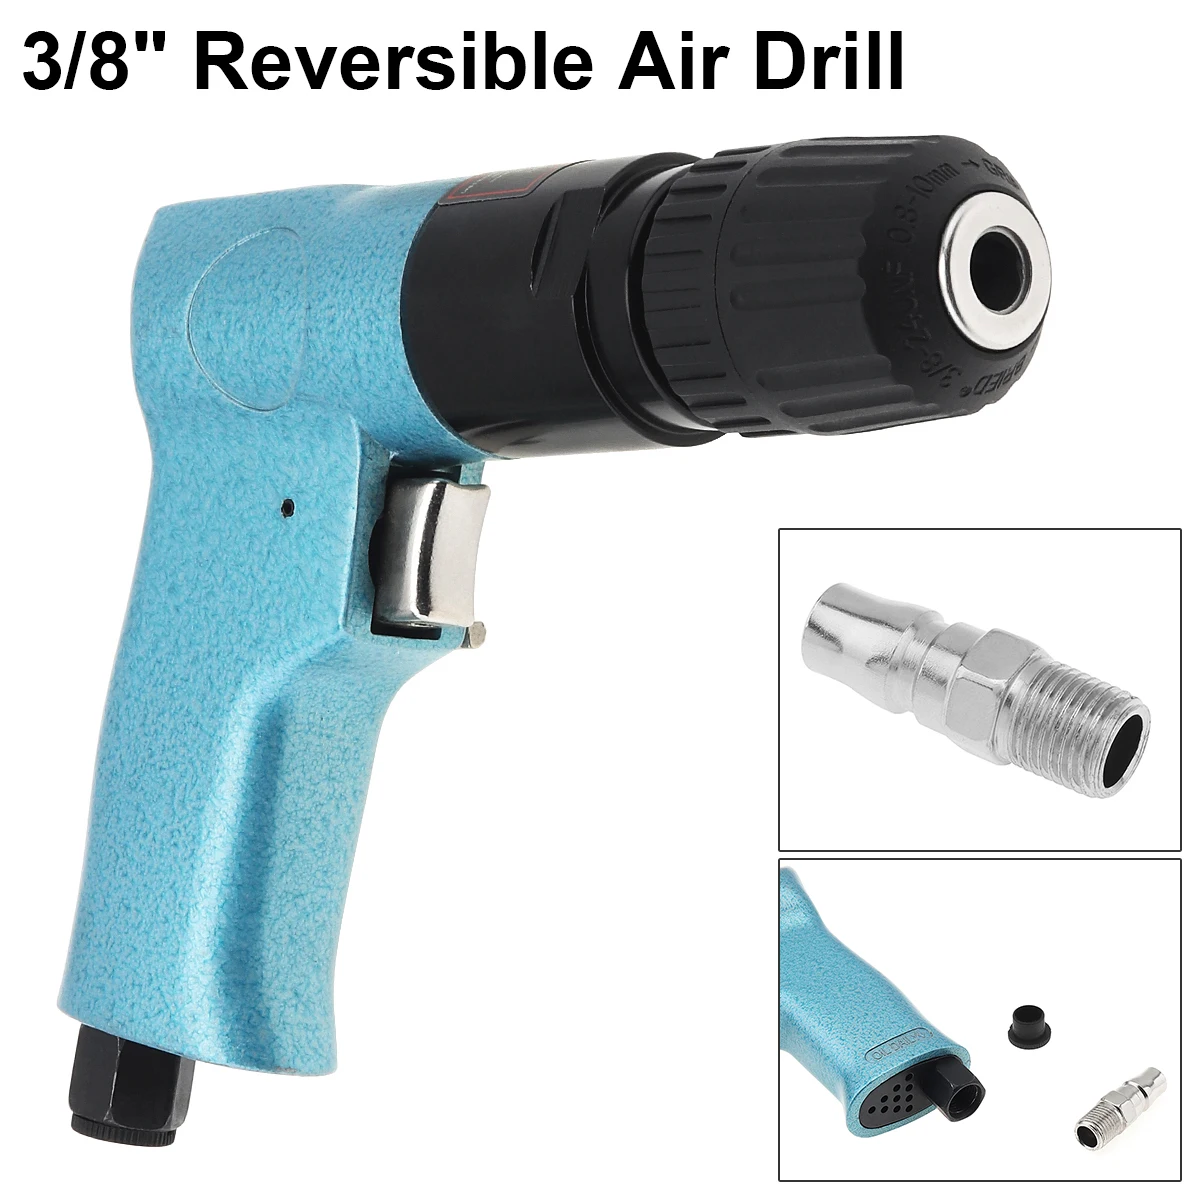 

3/8" 1800RPM High-speed Cordless Pistol Type Pneumatic Gun Drill Reversible Air Drill for Hole Drilling Self Locking Chuck